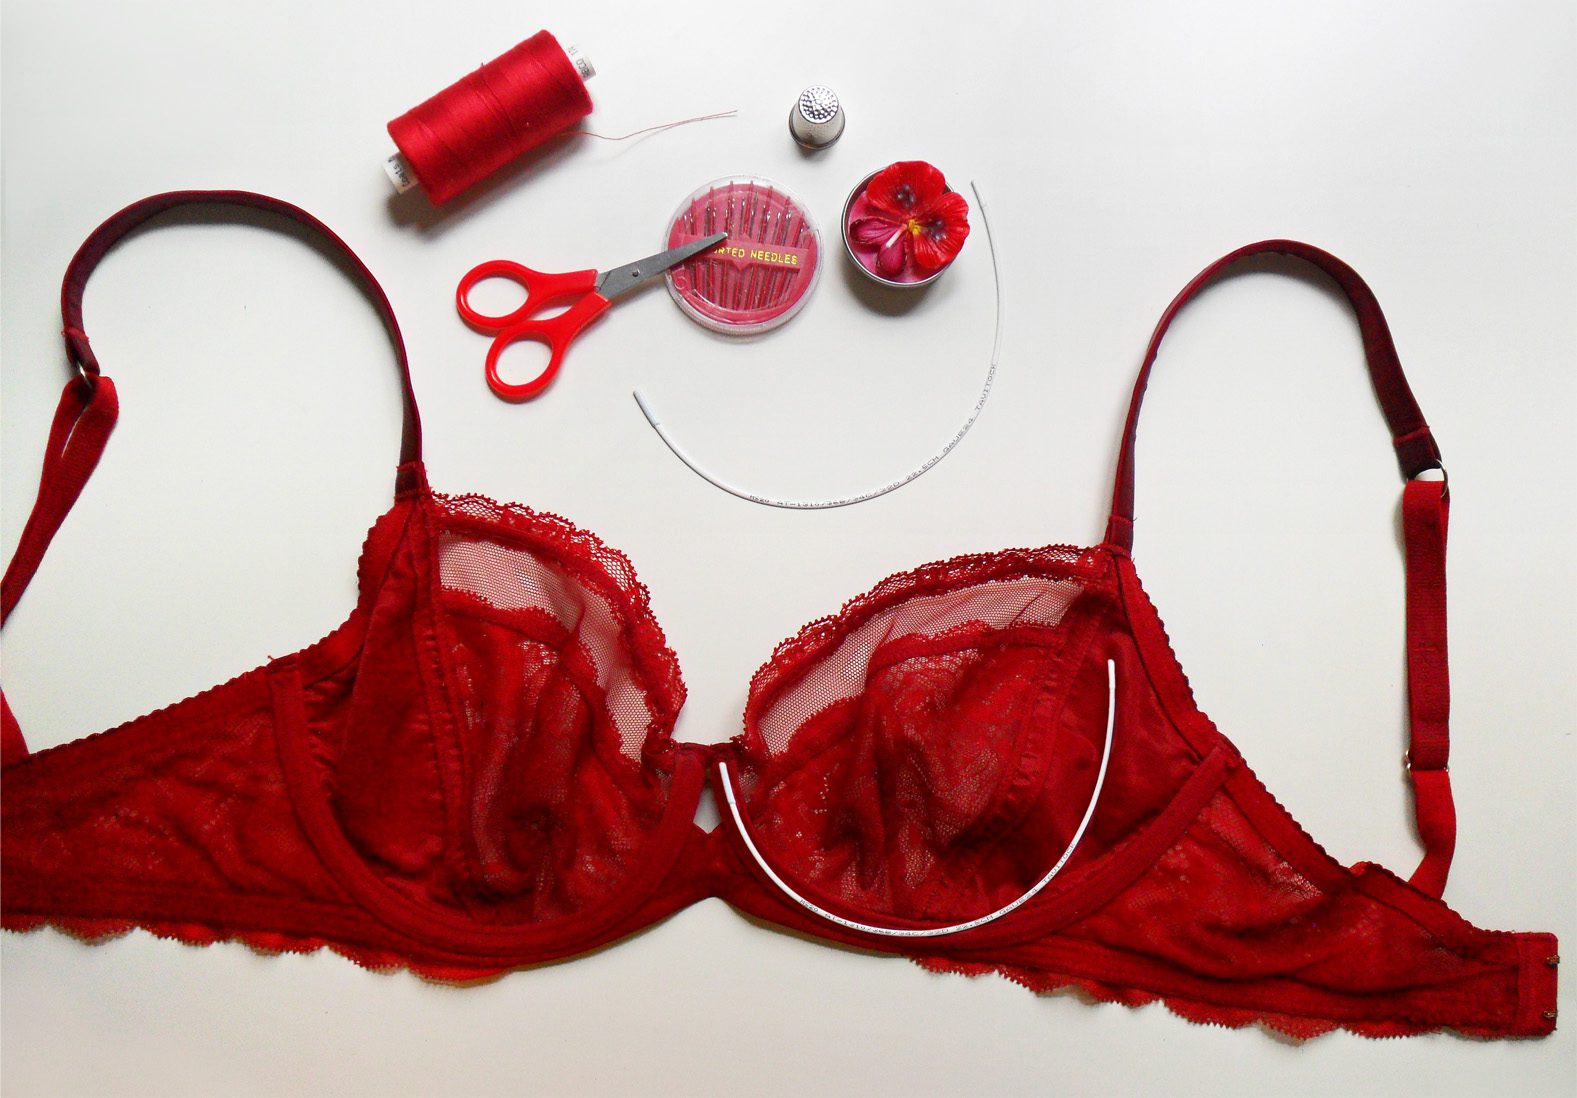 How to prevent uncomfortable underwire